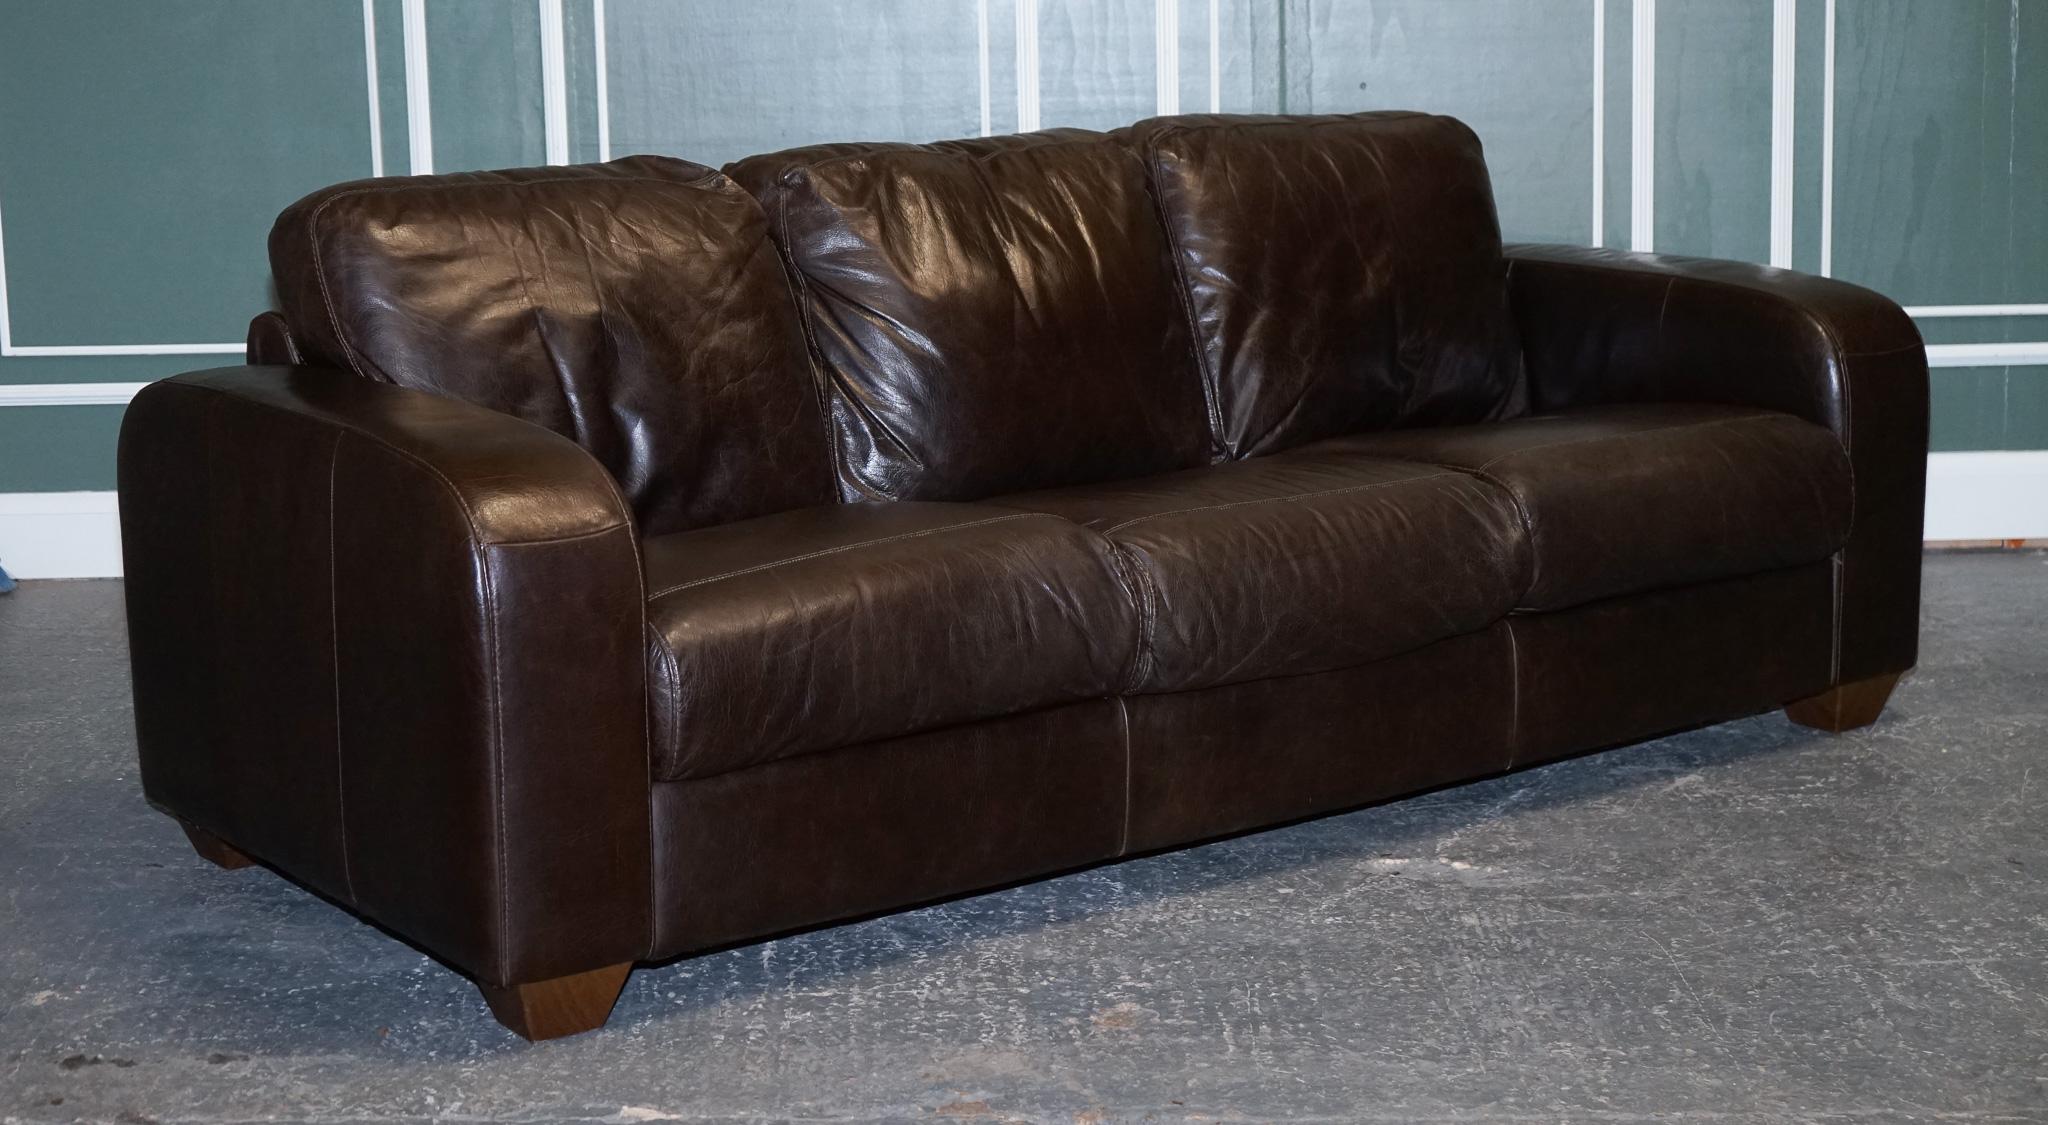 We are delighted to Present This Stunning Chocolate Brown Leather Three Seater Sofa.

The sofa is made by Sofitalia which is an established Italian company.

The leather is of very good Italian cow-hide quality and still has plenty of life to